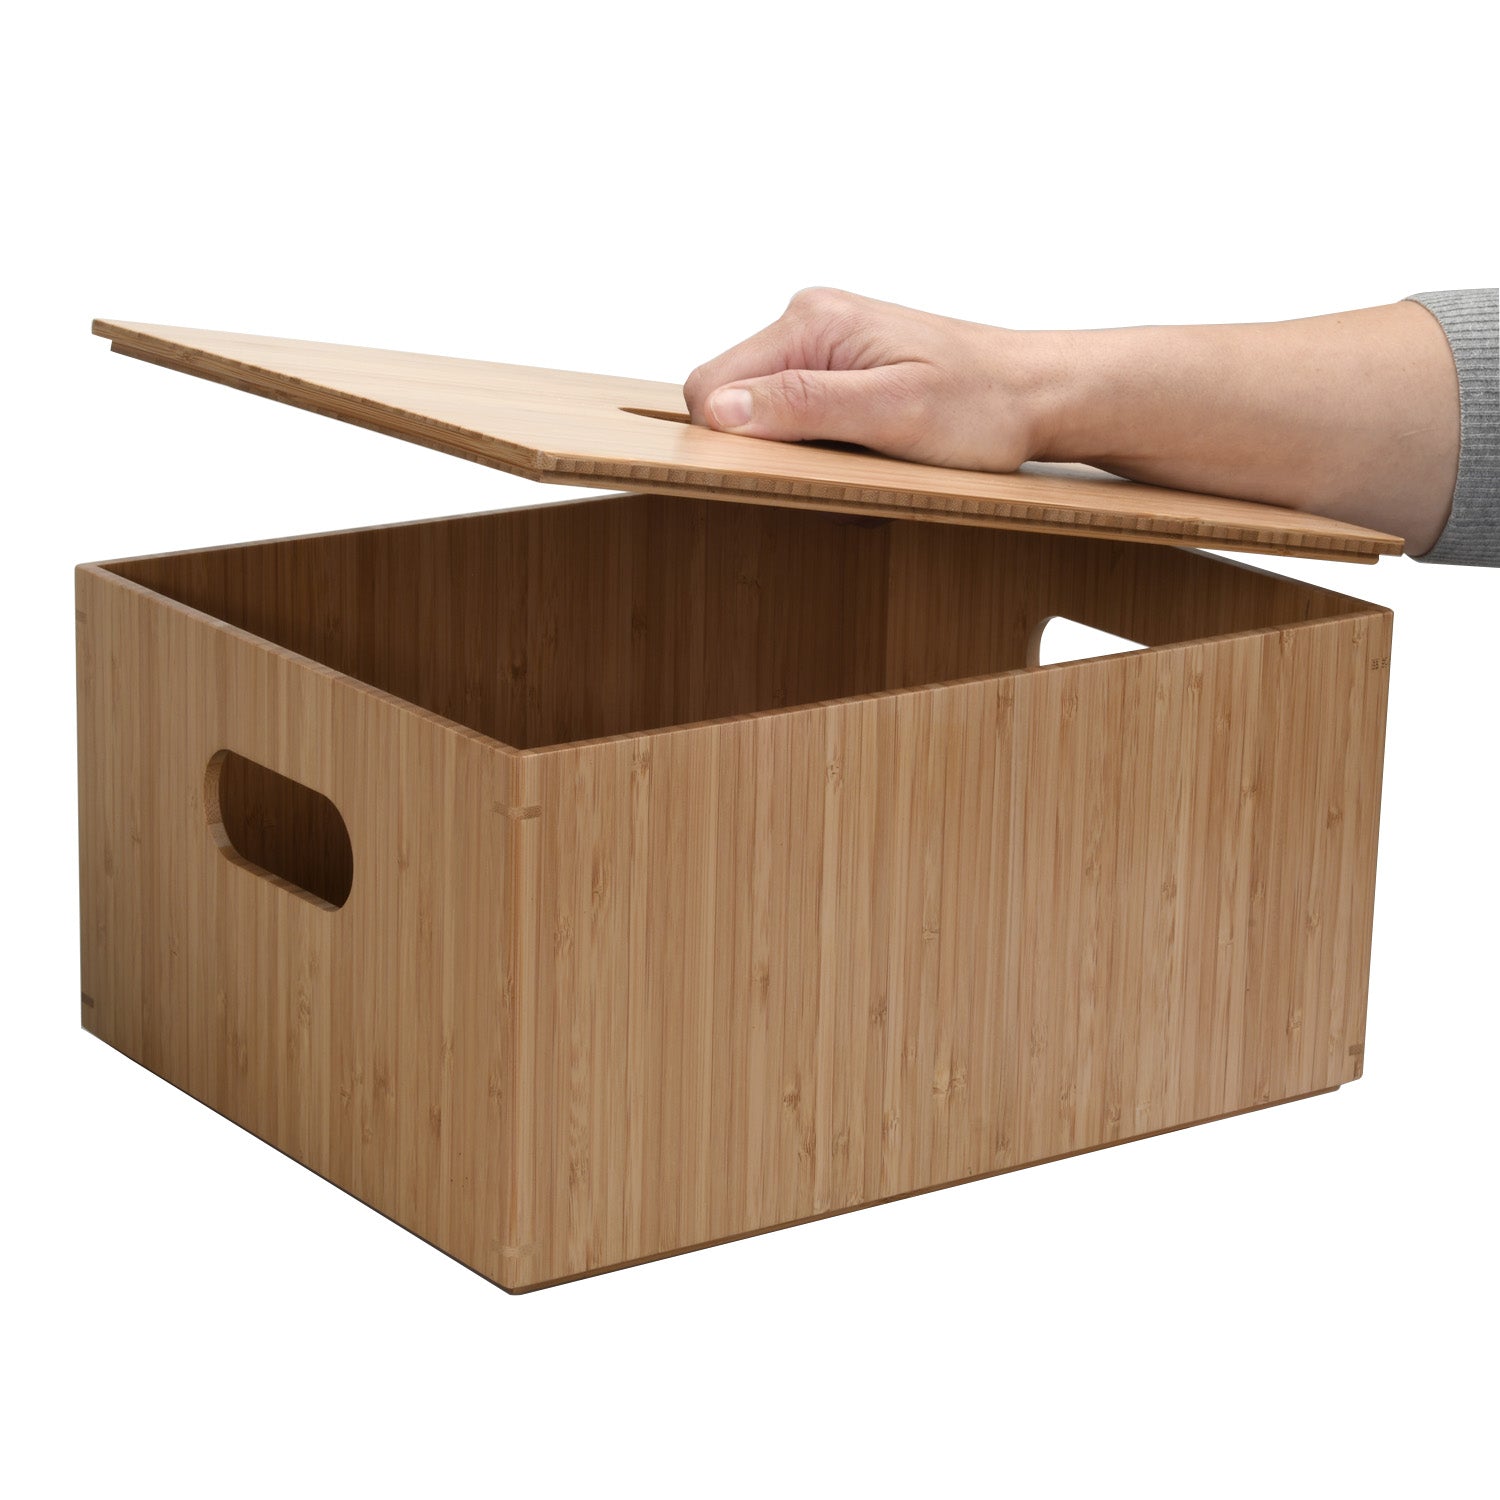 Mobilevision Bamboo Storage Box Plus Lid Combo, 14x11x 6.5, Durable Bin w/Handles, for Clothes, Shoes, Arts & Crafts, Closet & Office Shelf